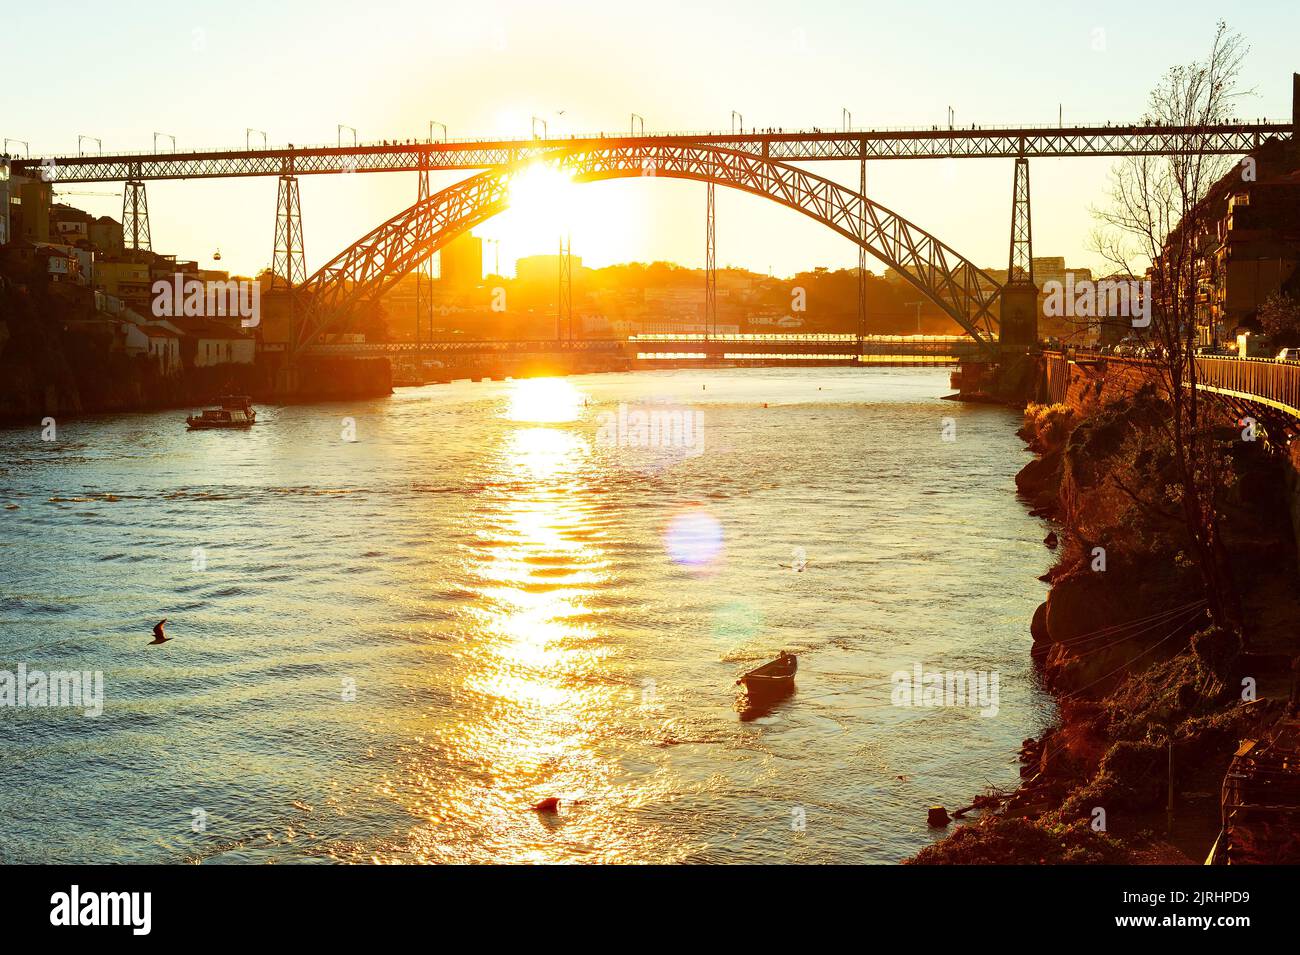 Sunset view of Douro river with boats and Dom Luis bridge in bright sunlight, Porto, Portugal Stock Photo